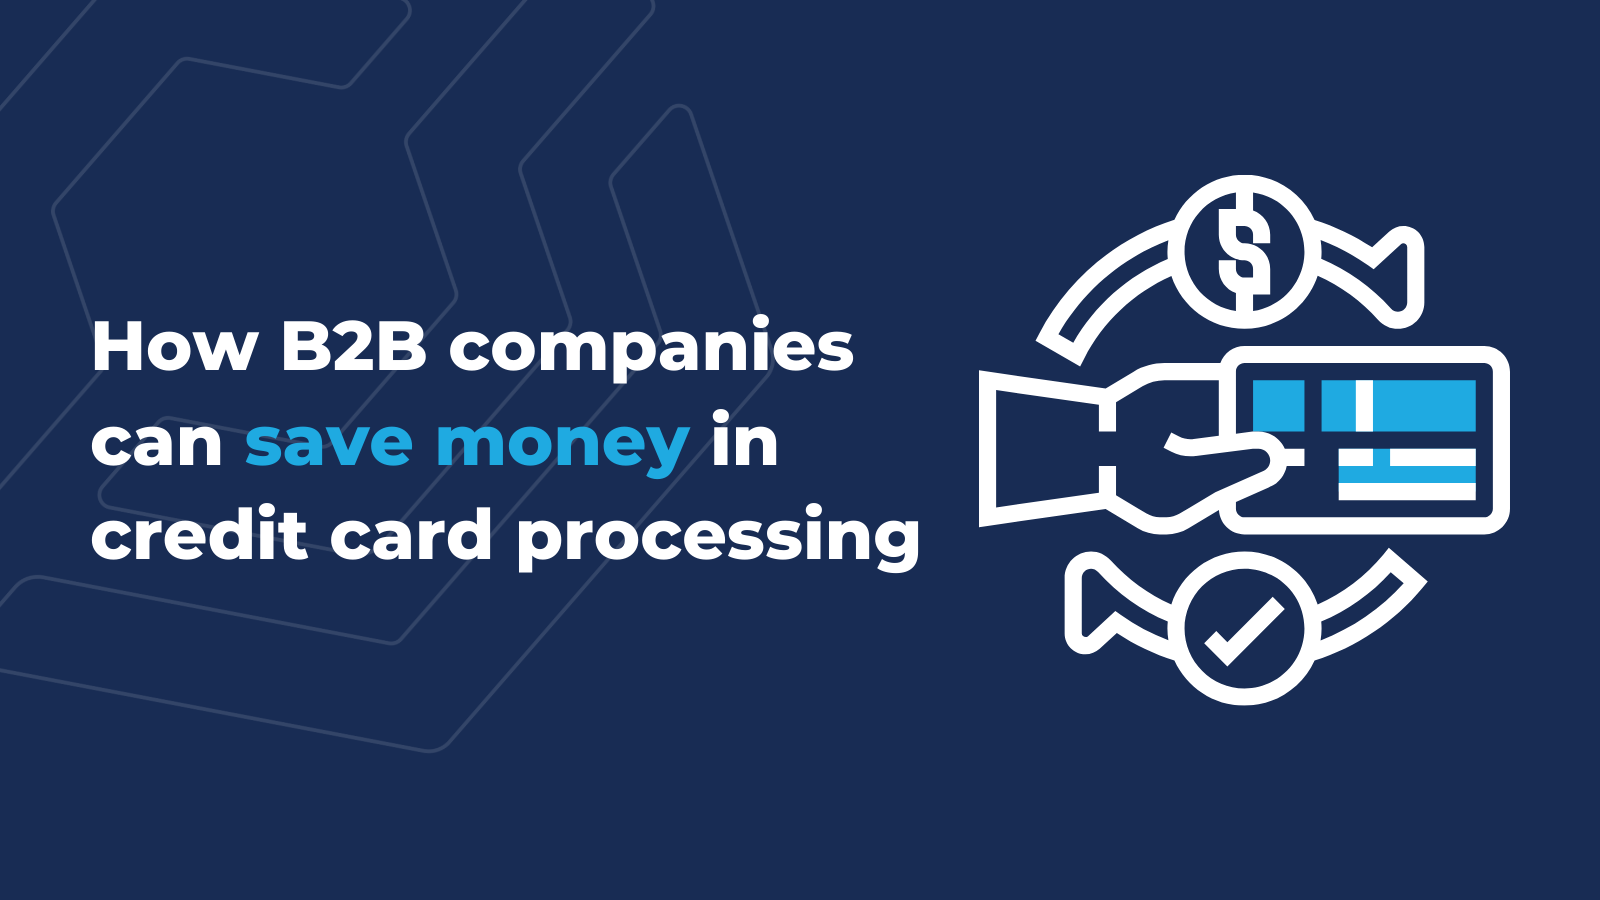 How to Choose a Zero-Fee B2B Payment Processor